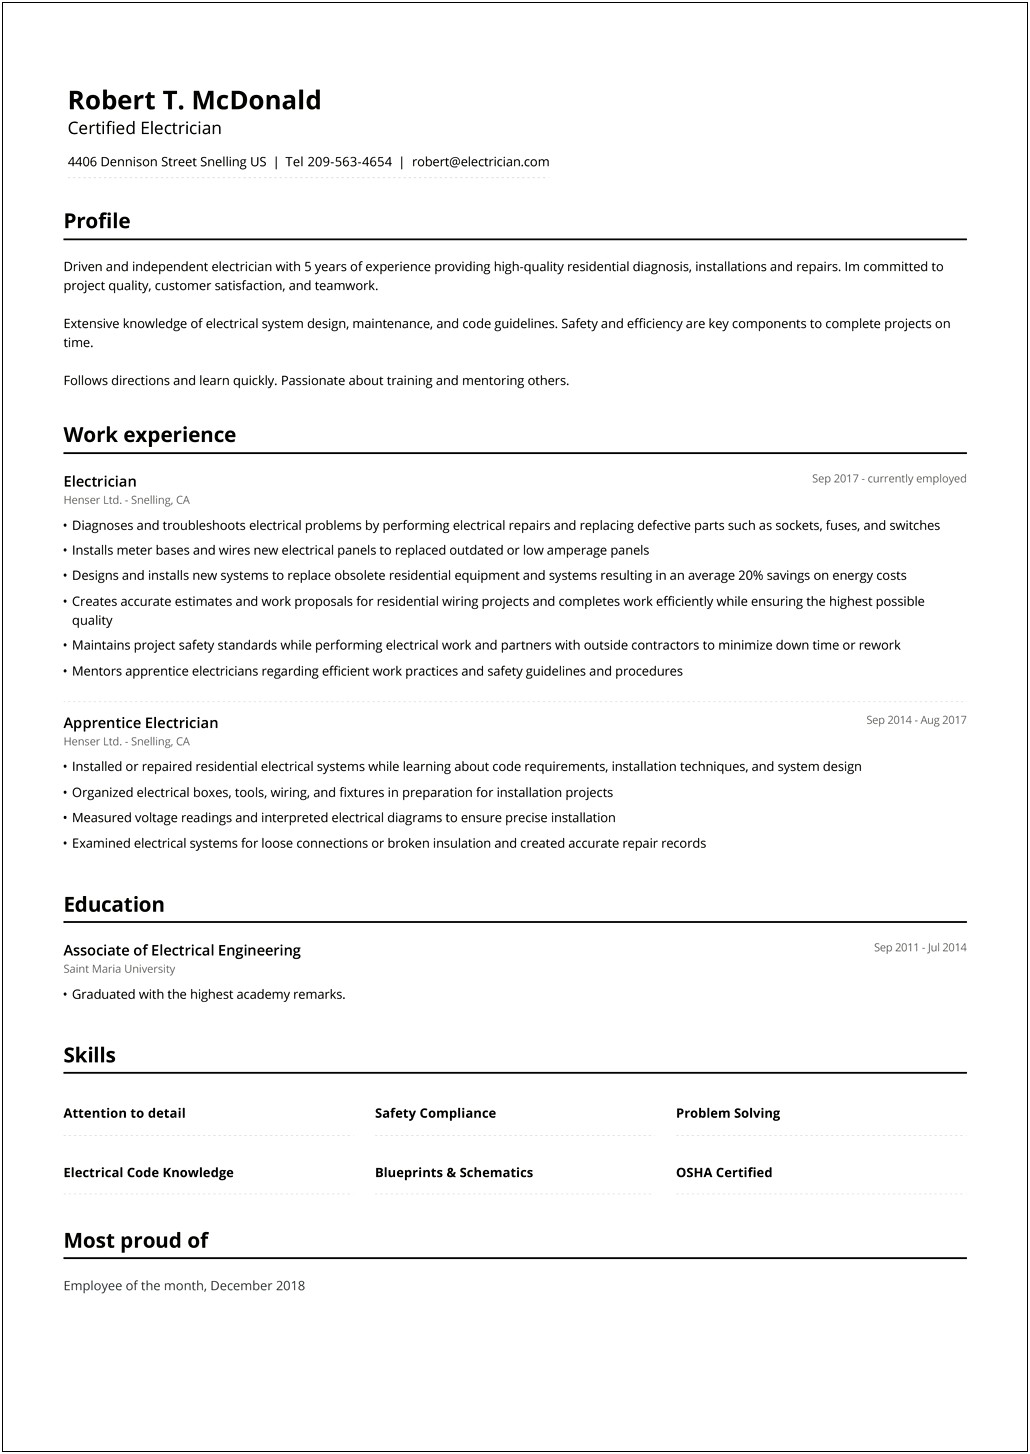 Resume Template For 5 Previous Jobs